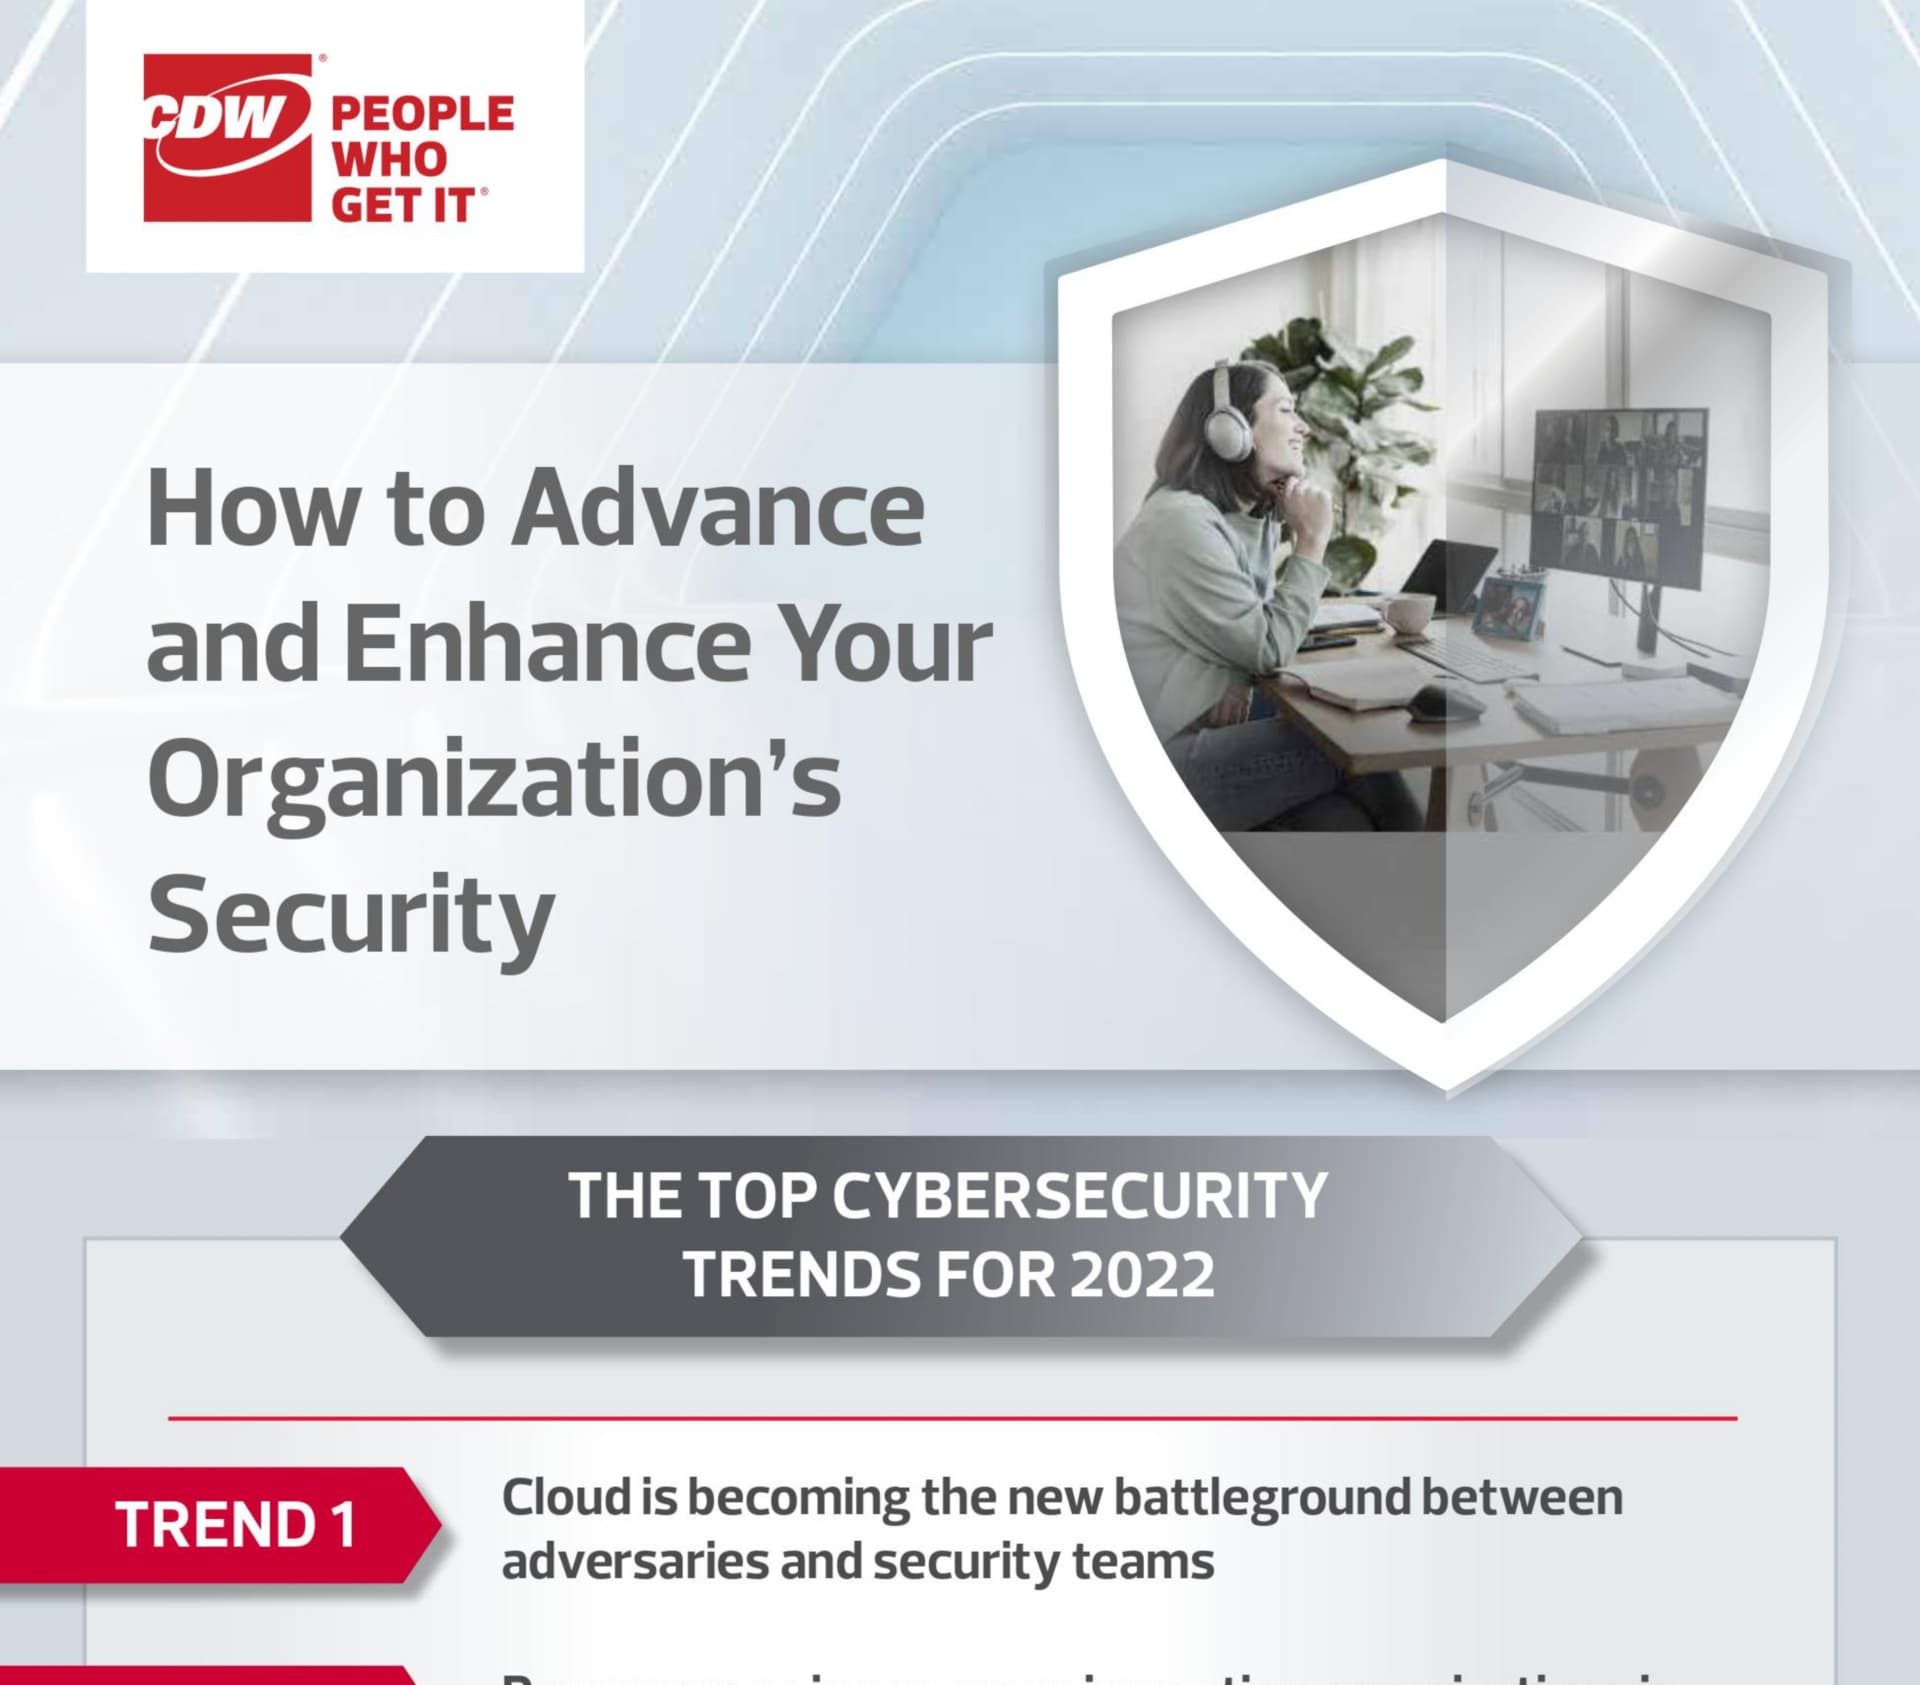 How to Advance and Enhance Your Organization’s Security